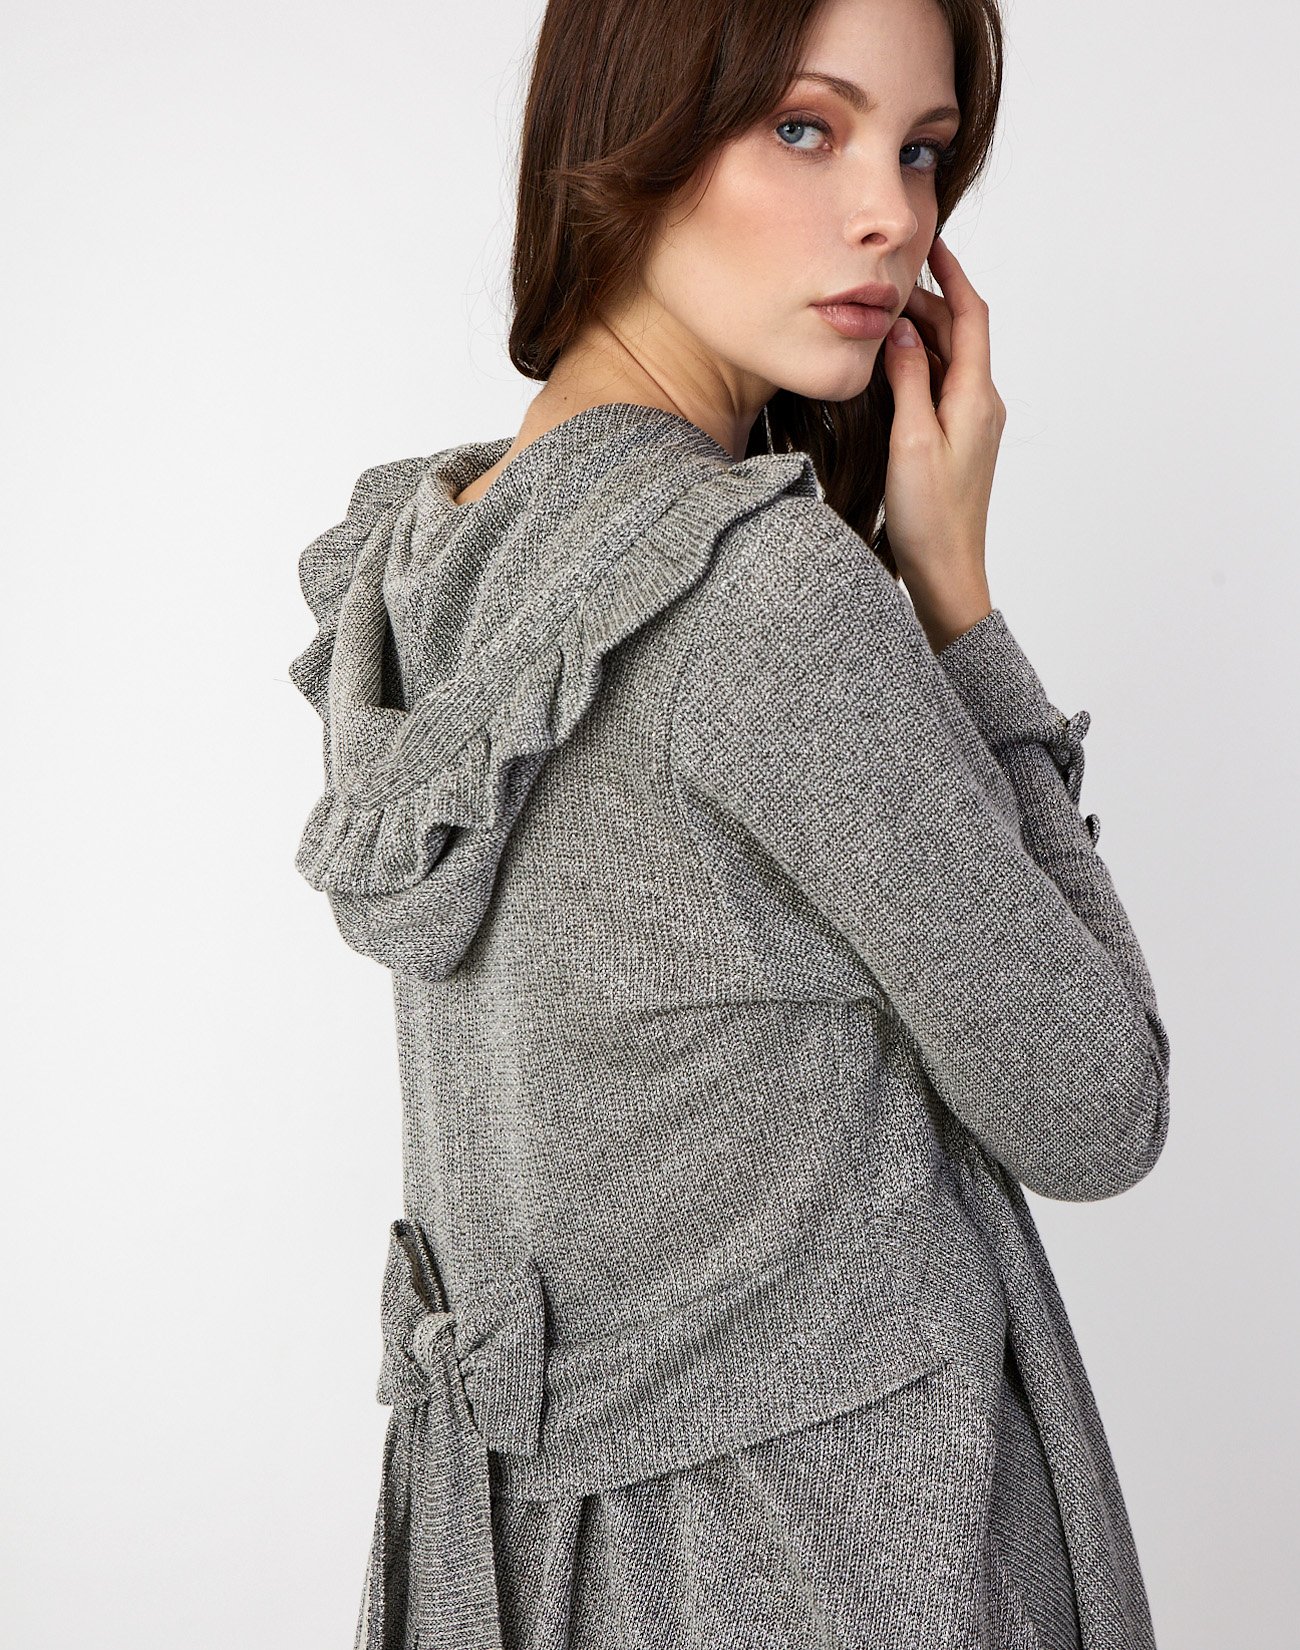 Hooded cardigan with bow